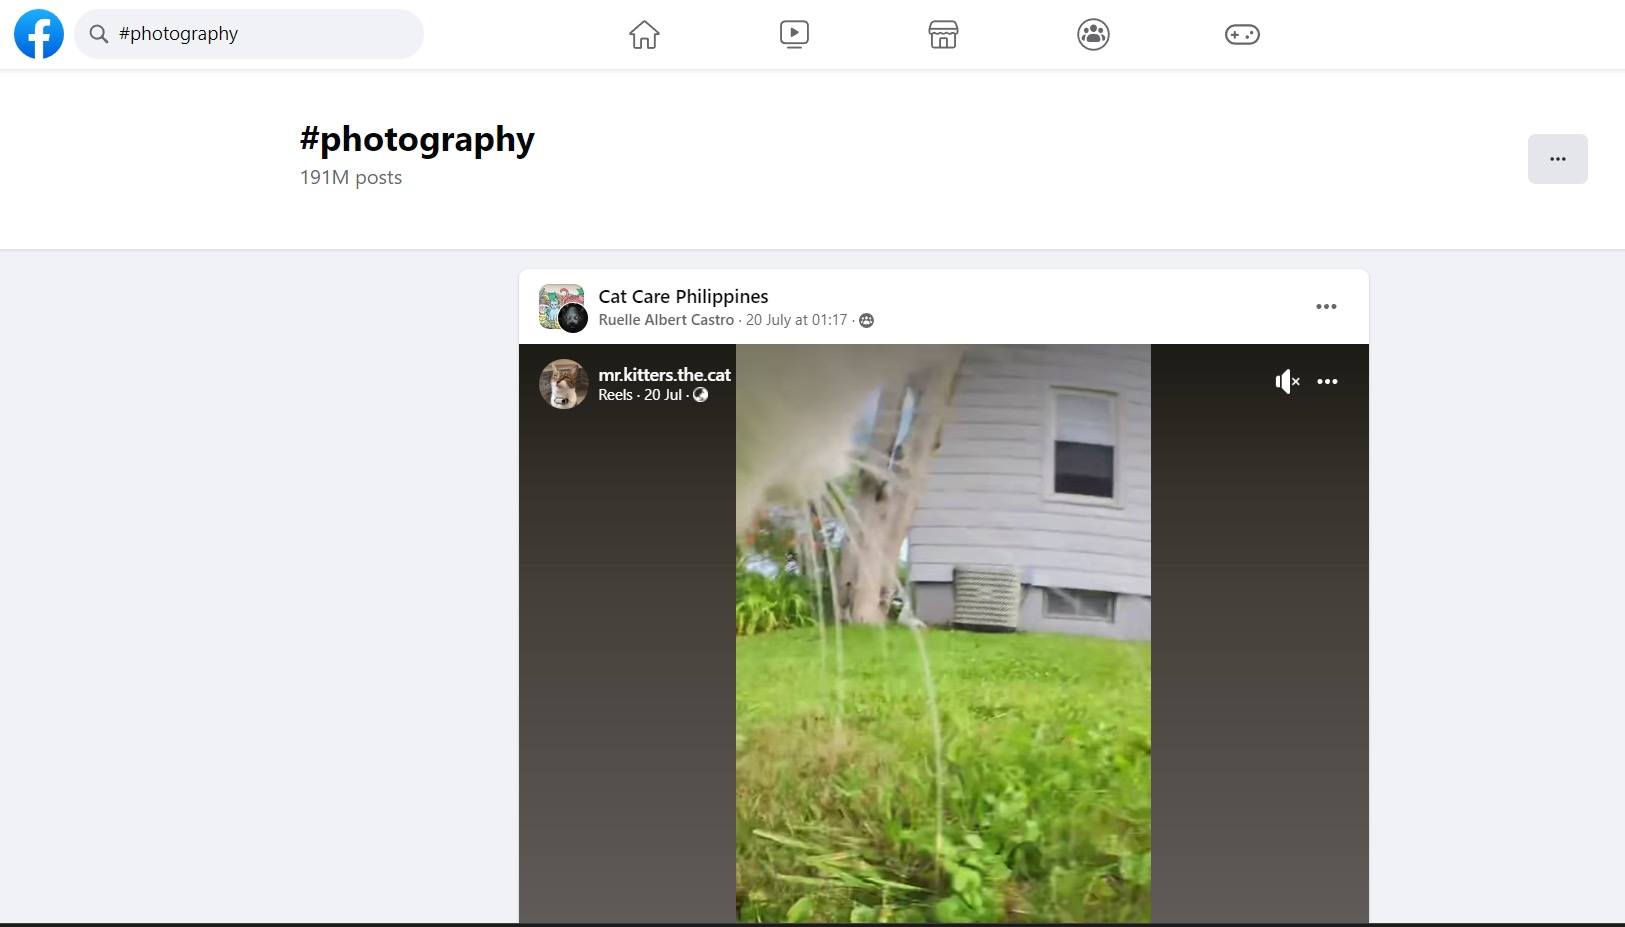 Screenshot from Facebook showing photography hashtag on timeline